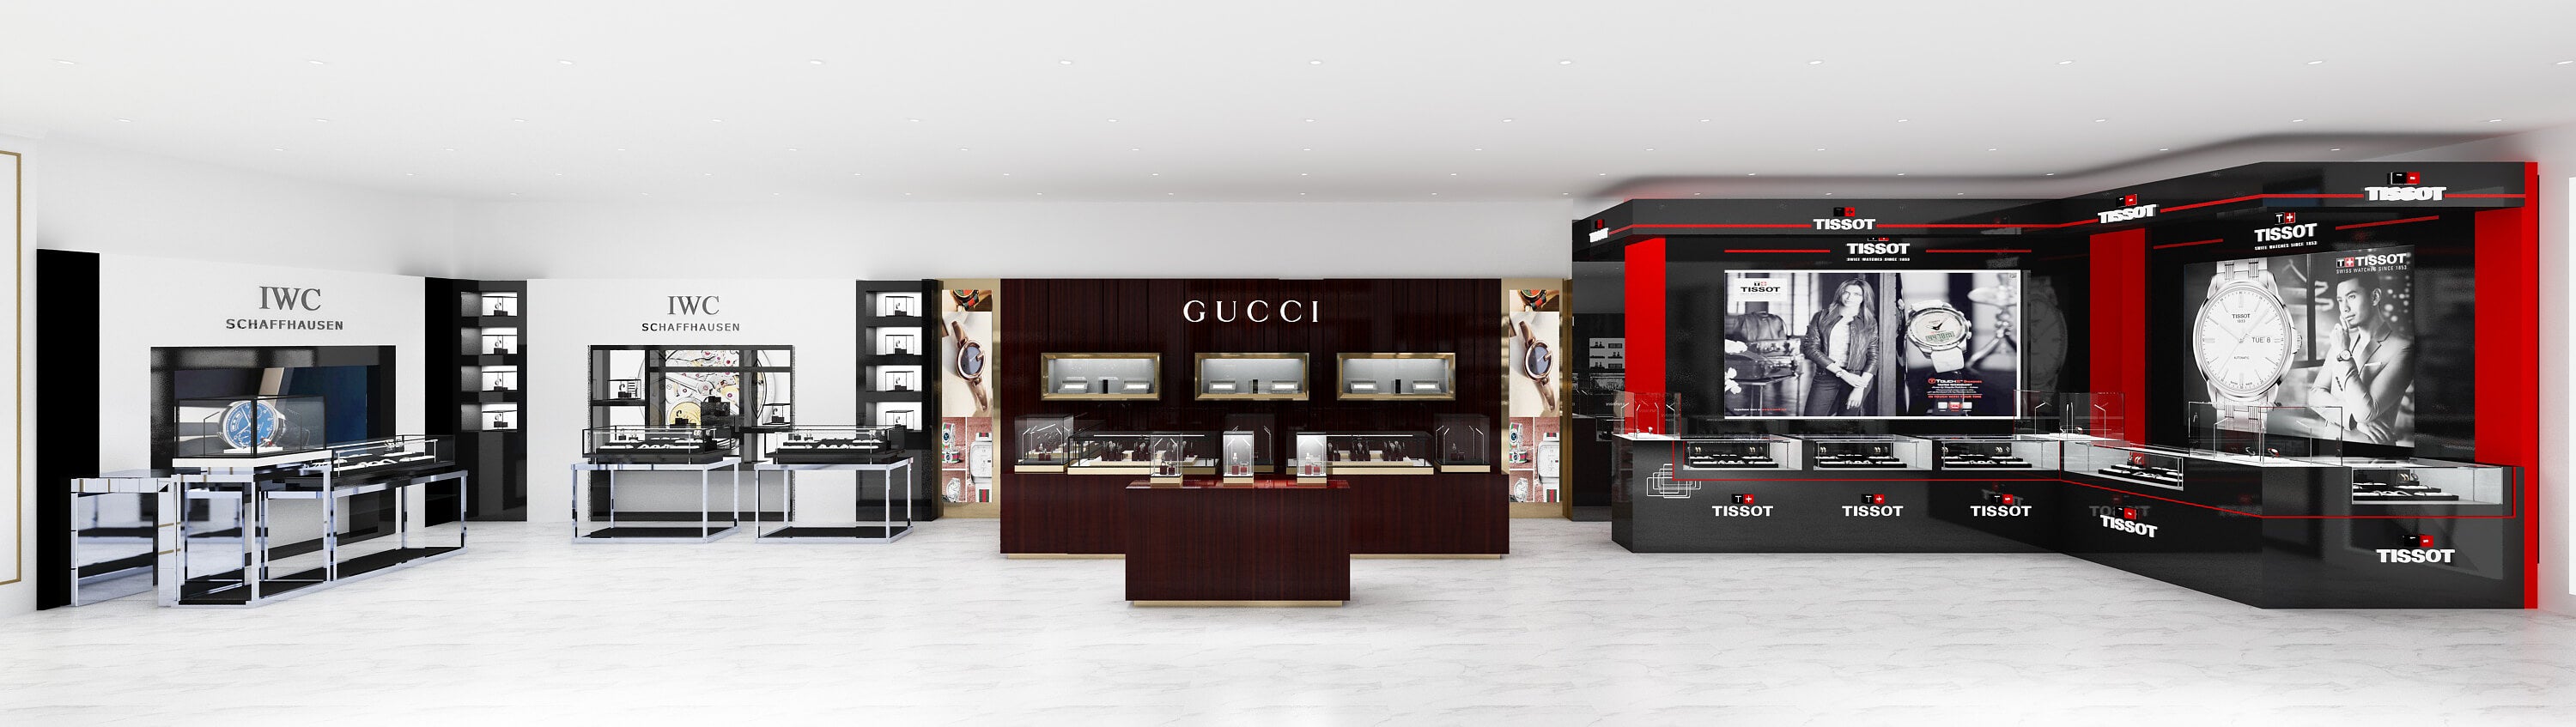 IWC, GUCCI, TISSOT watch stores in shopping malls